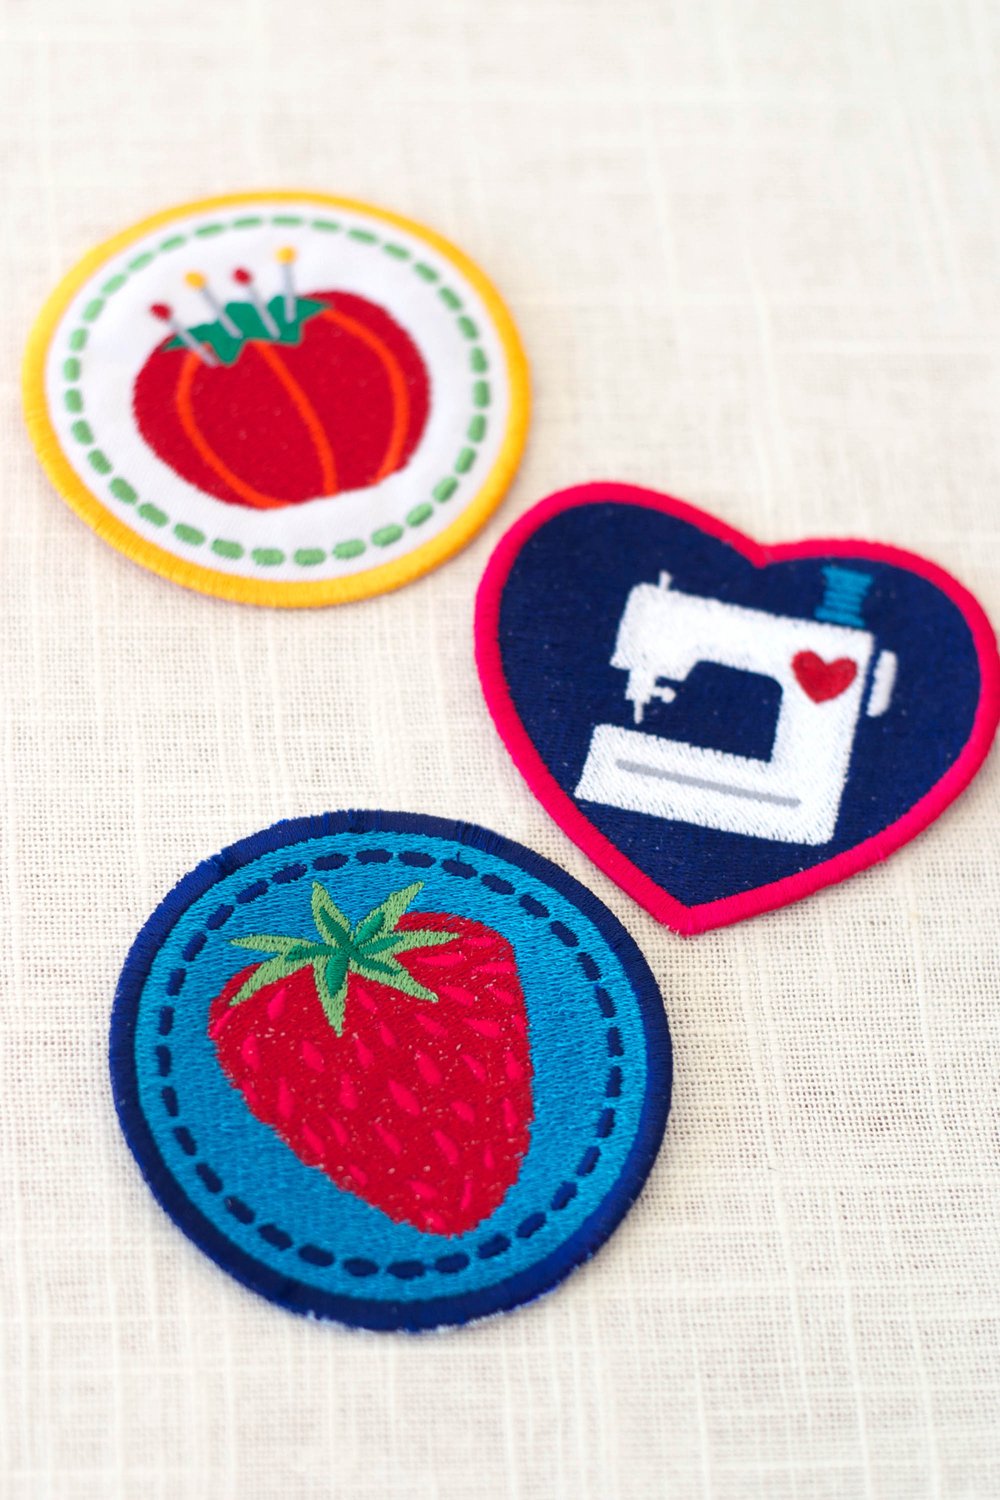 20pcs Iron on Patches Strawberry Patches for Clothing Embroidered Patches Clothing Accessories, Size: 2.7x2.3cm